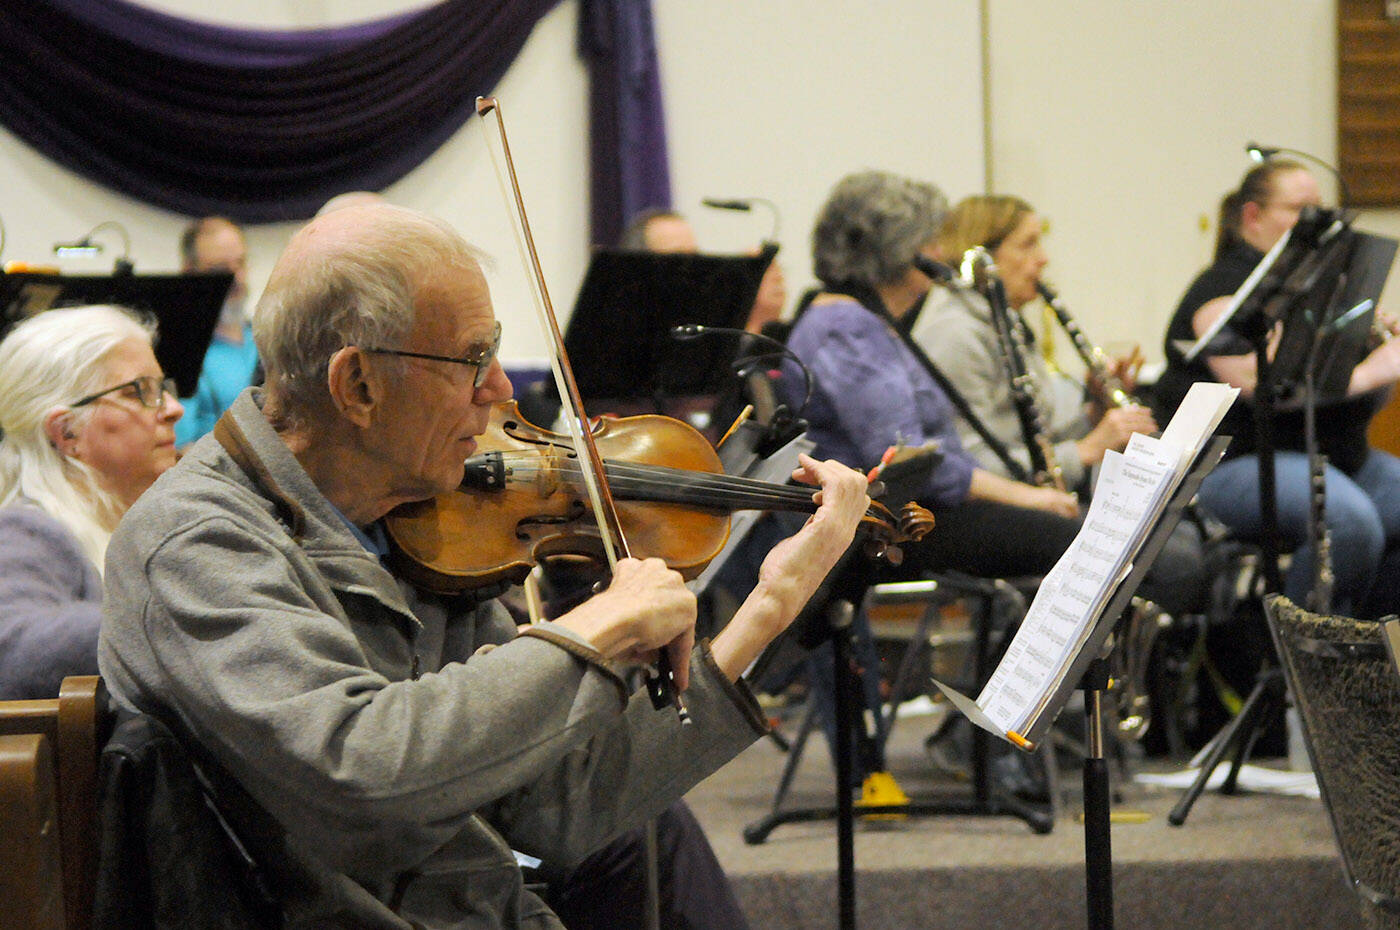 Members of the Chilliwack Metropolitan Orchestra rehearse on Wednesday, March 16, 2022. (Jenna Hauck/ Chilliwack Progress)